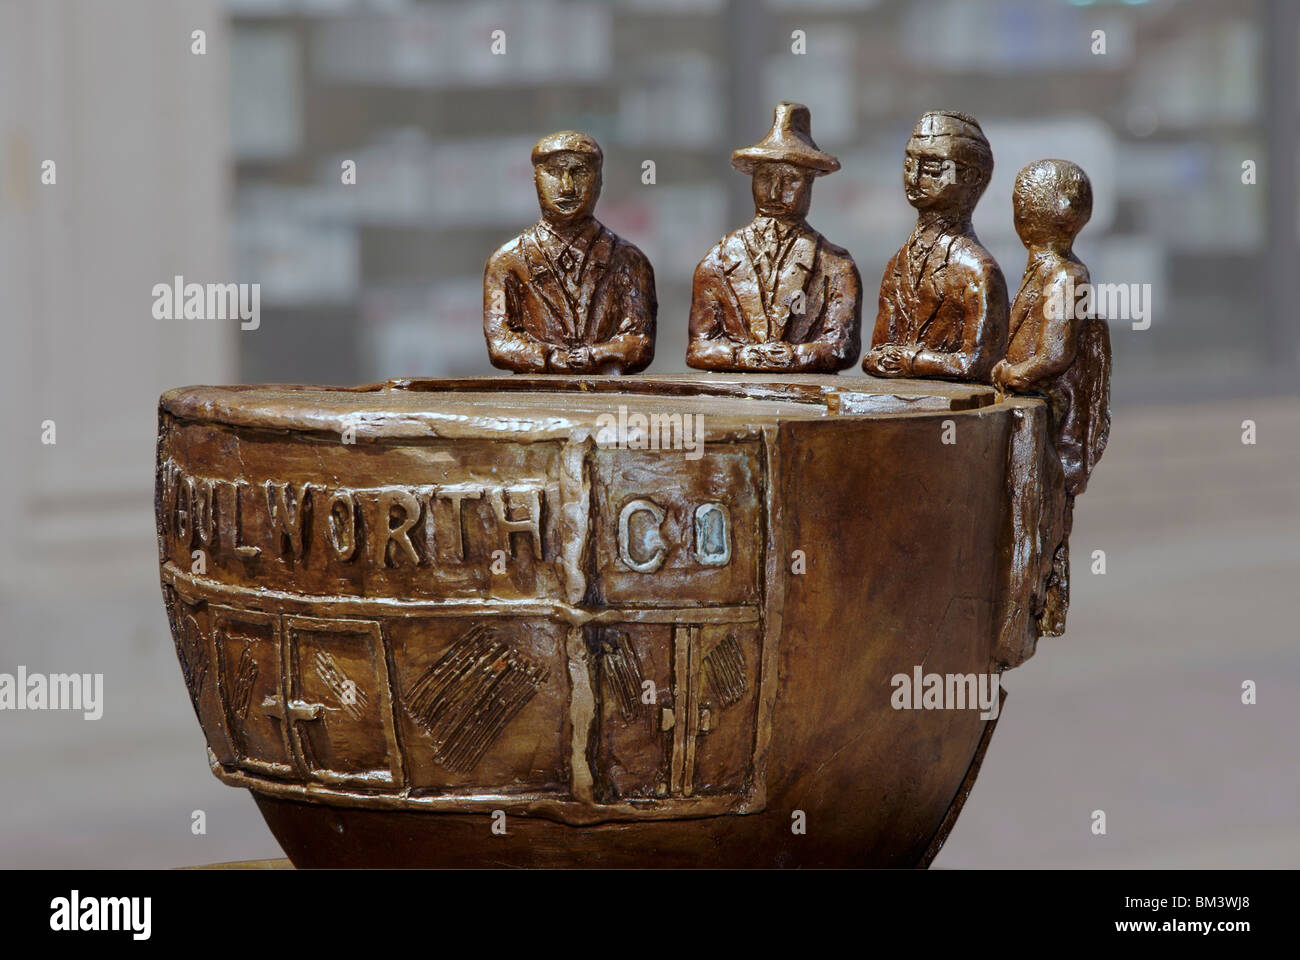 Statue of Woolworth lunch counter sit-in, Greensboro, NC, North Carolina. Stock Photo